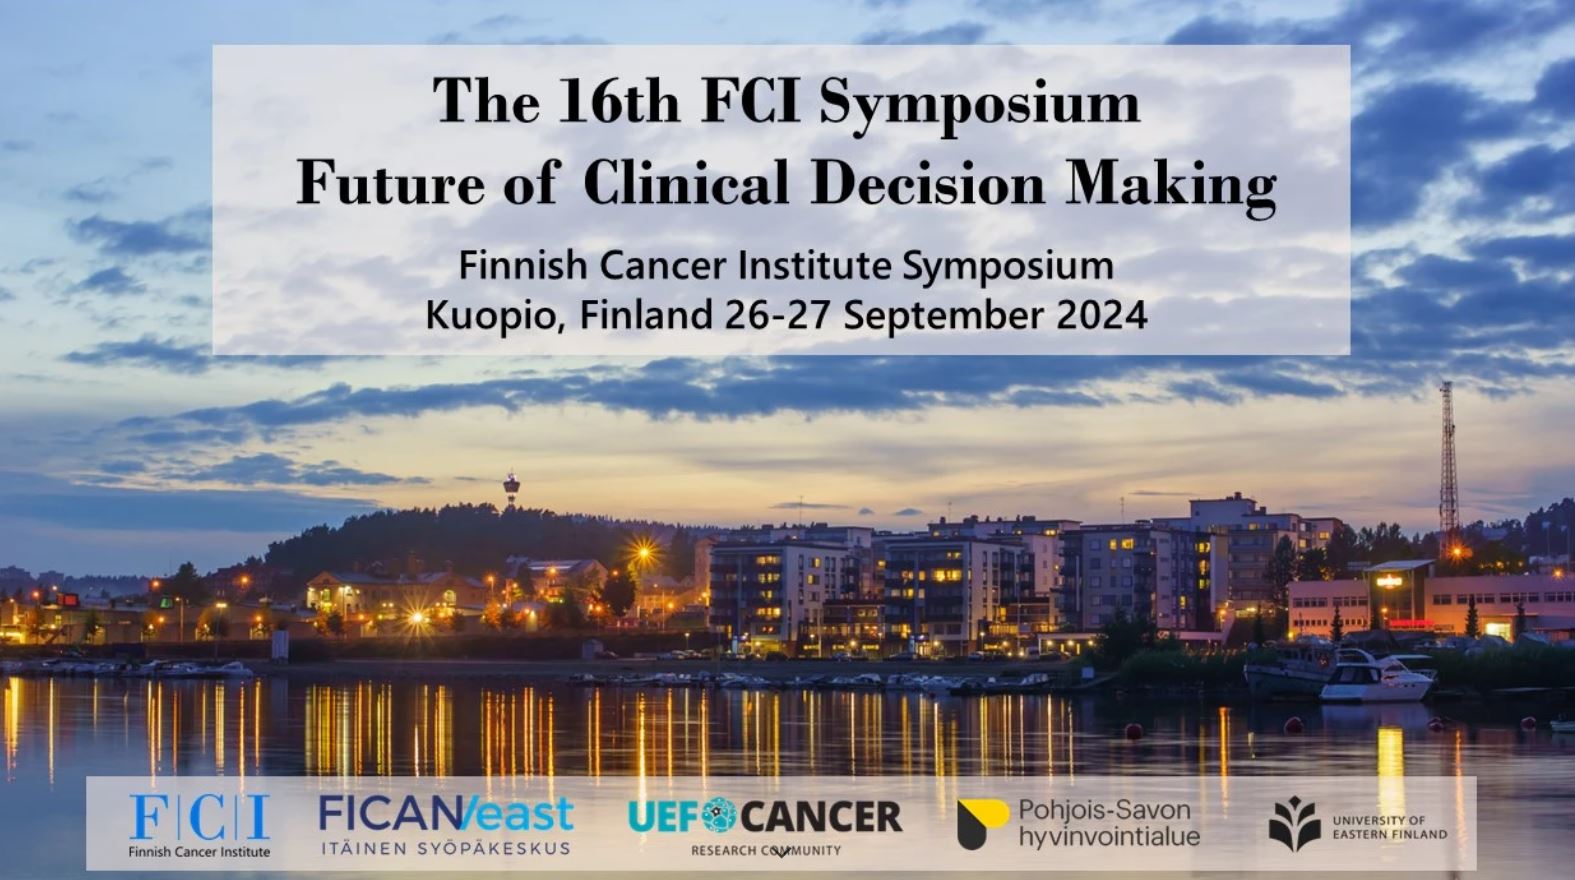 The 16th FCI Symposium "Future of Clinical Decision Making"